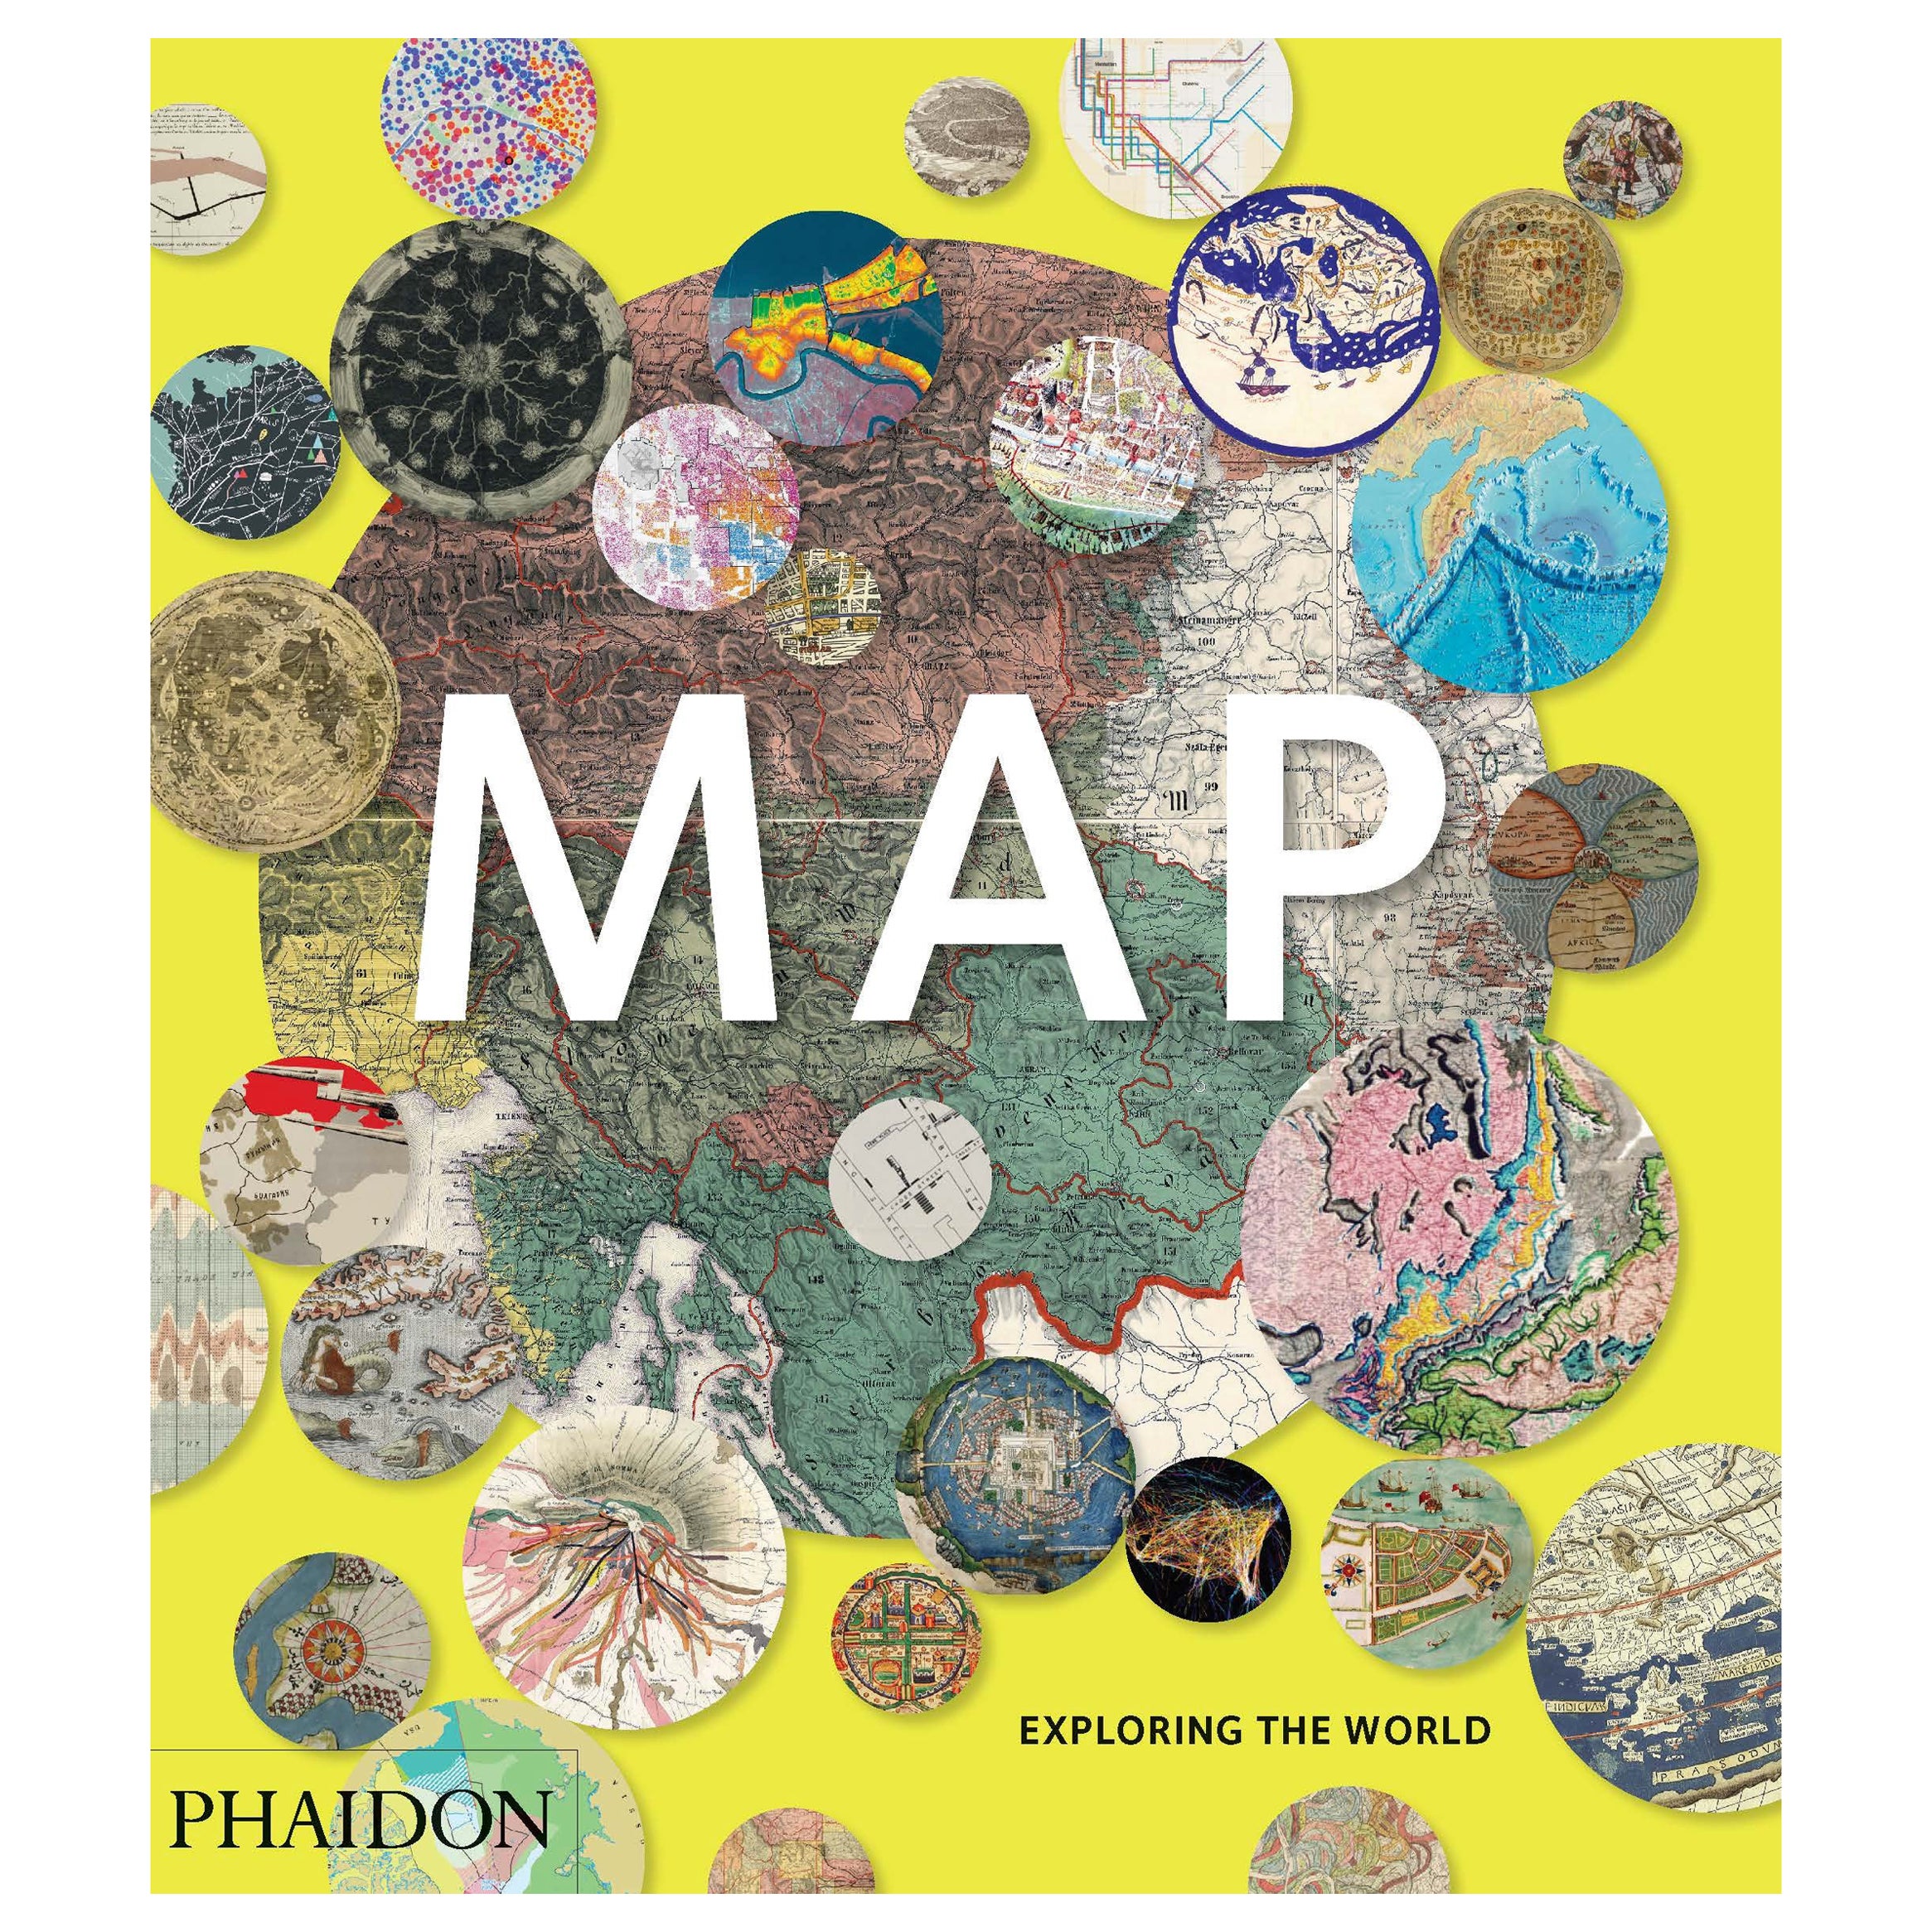 Map, Exploring The World